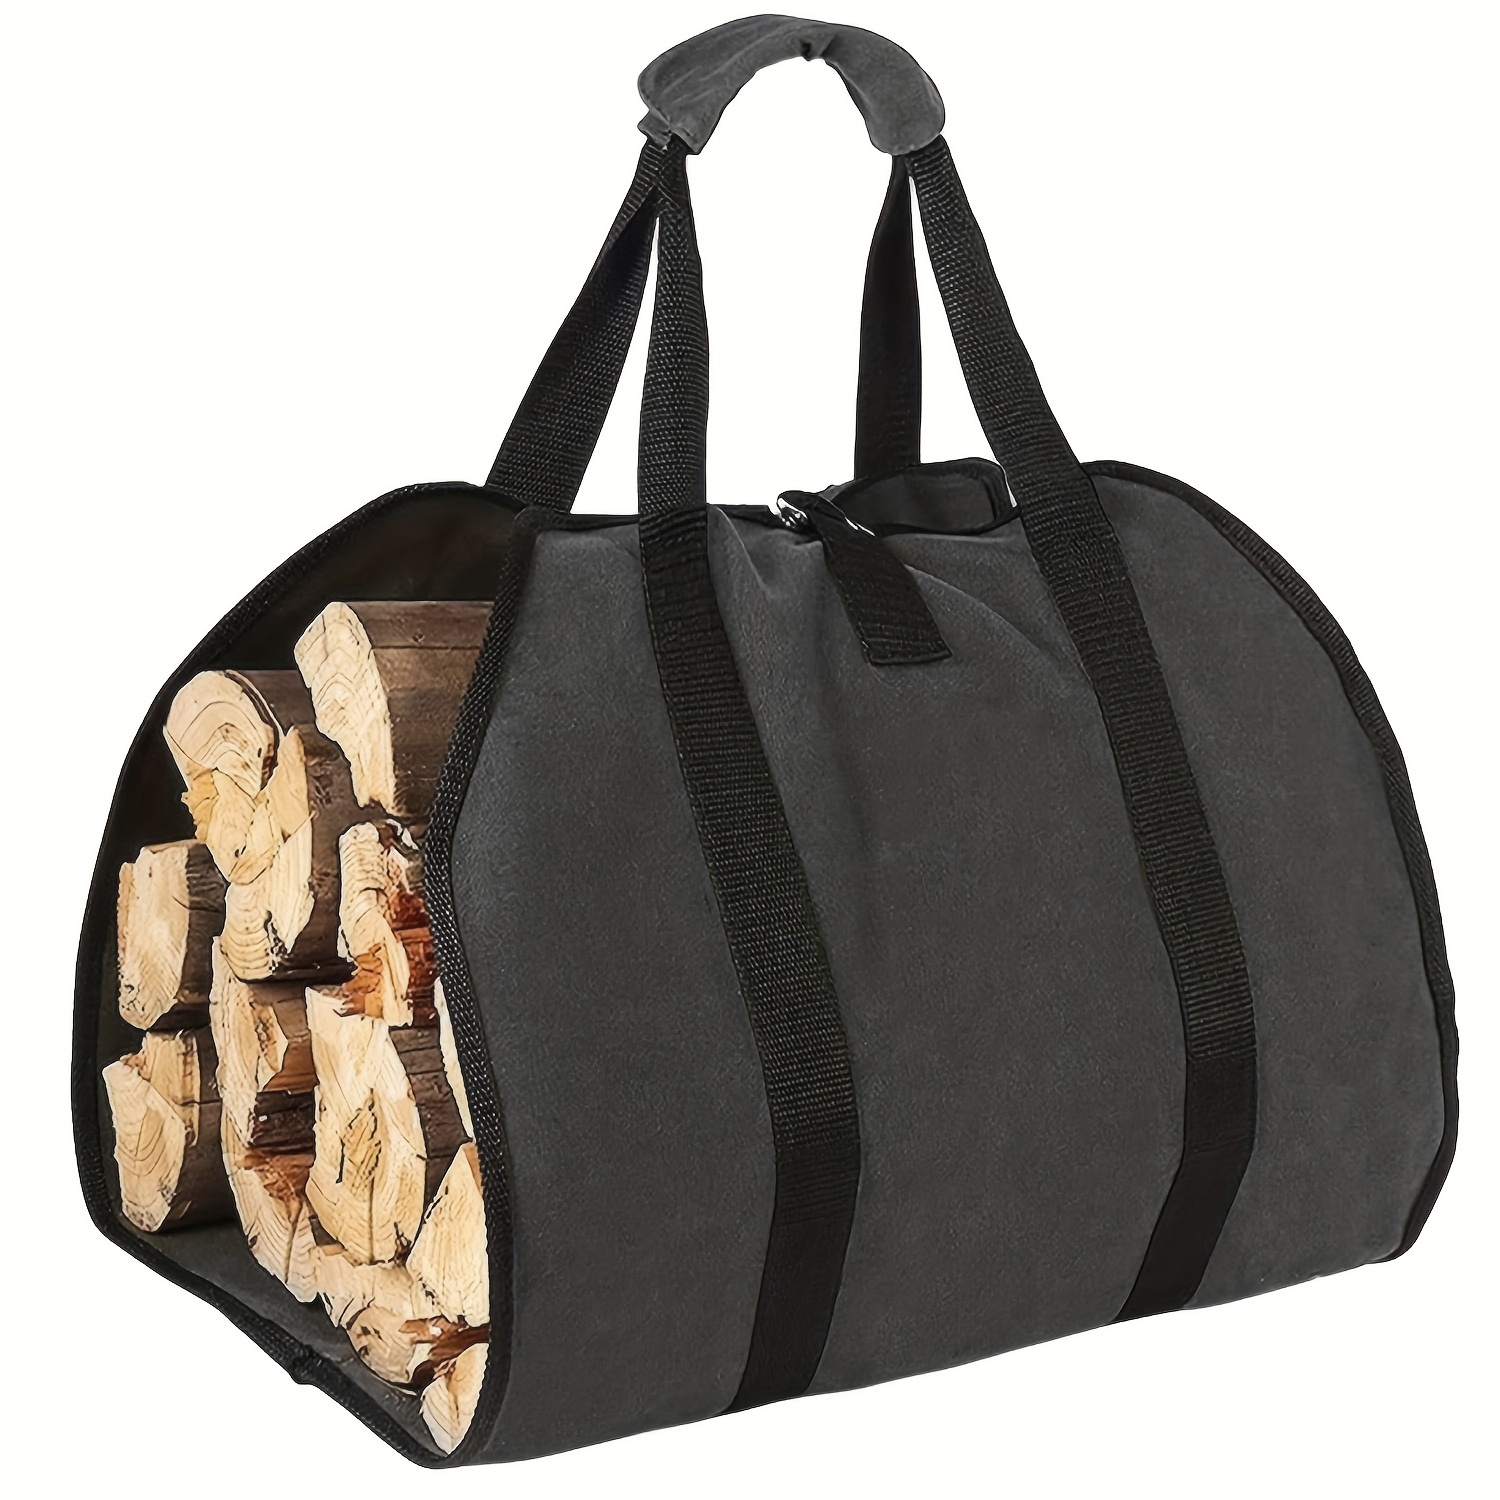 Heavy-Duty Firewood Log Carrier Bag - Portable and Waterproof Storage Tote with Reinforced Handles for Easy Outdoor Wood Transport